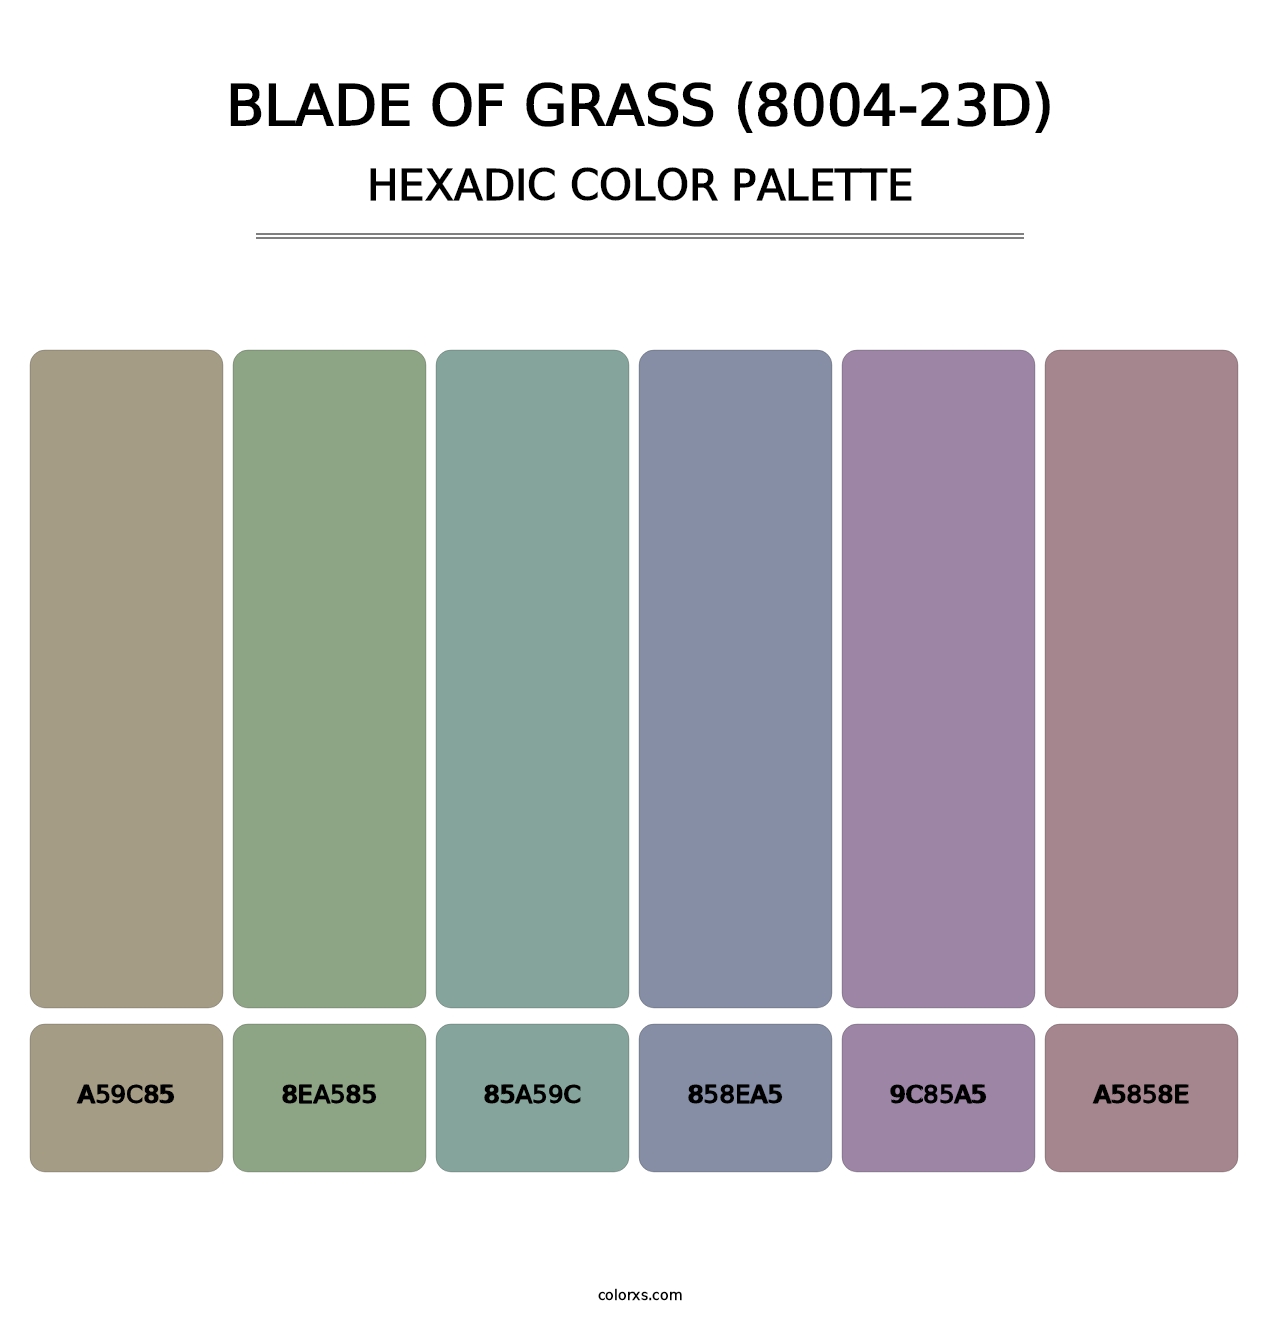 Blade of Grass (8004-23D) - Hexadic Color Palette